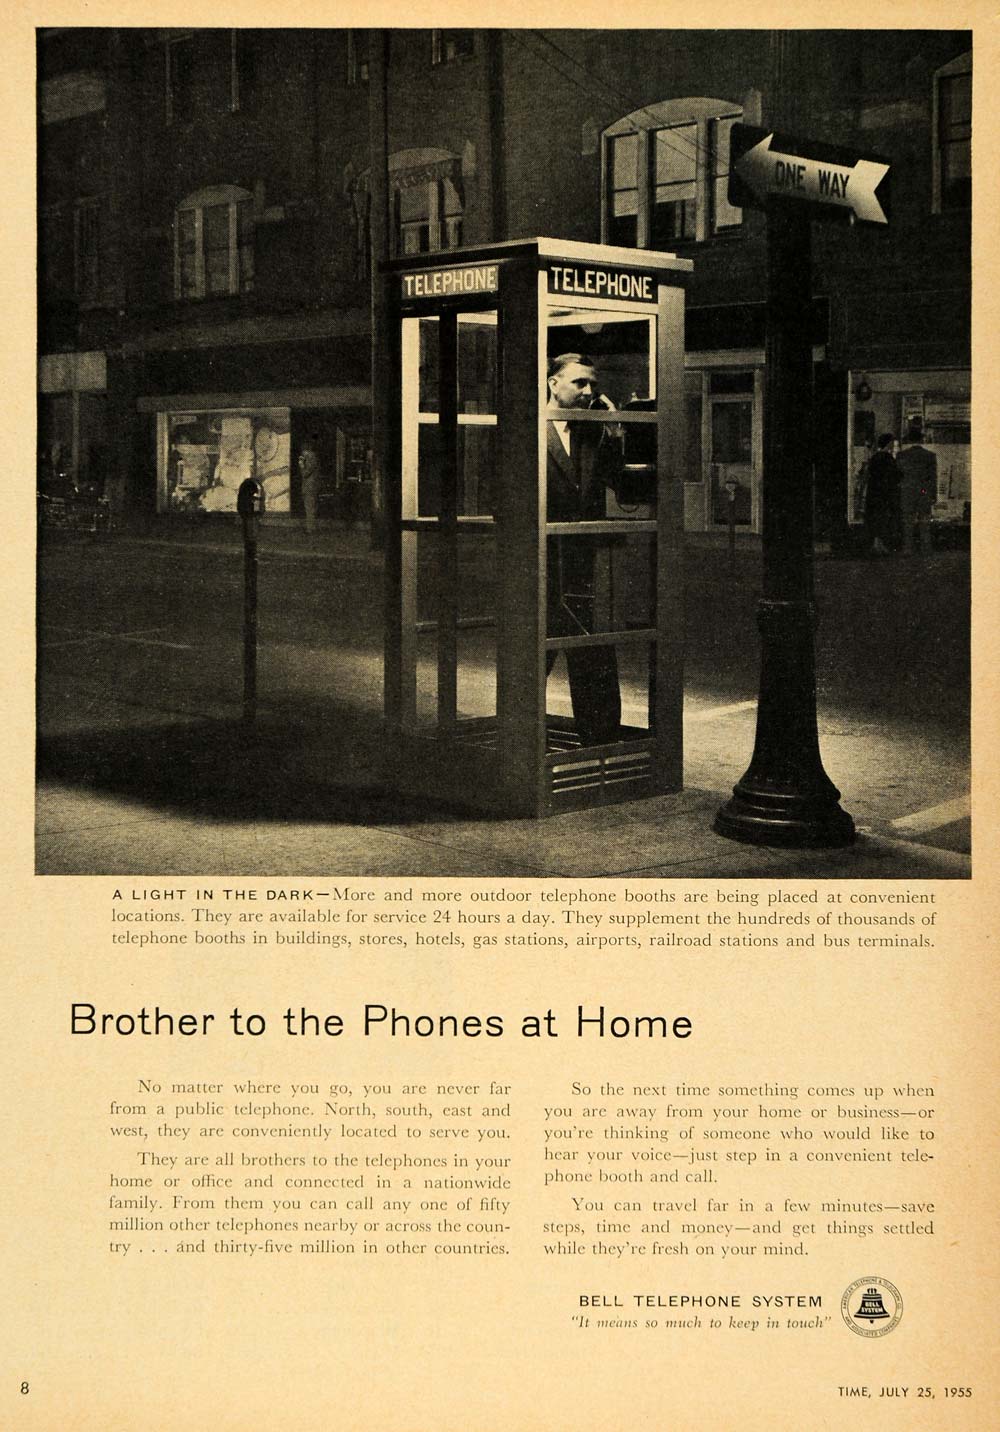 1955 Ad Bell Telephone System Phone Booth Brother Calls   ORIGINAL 